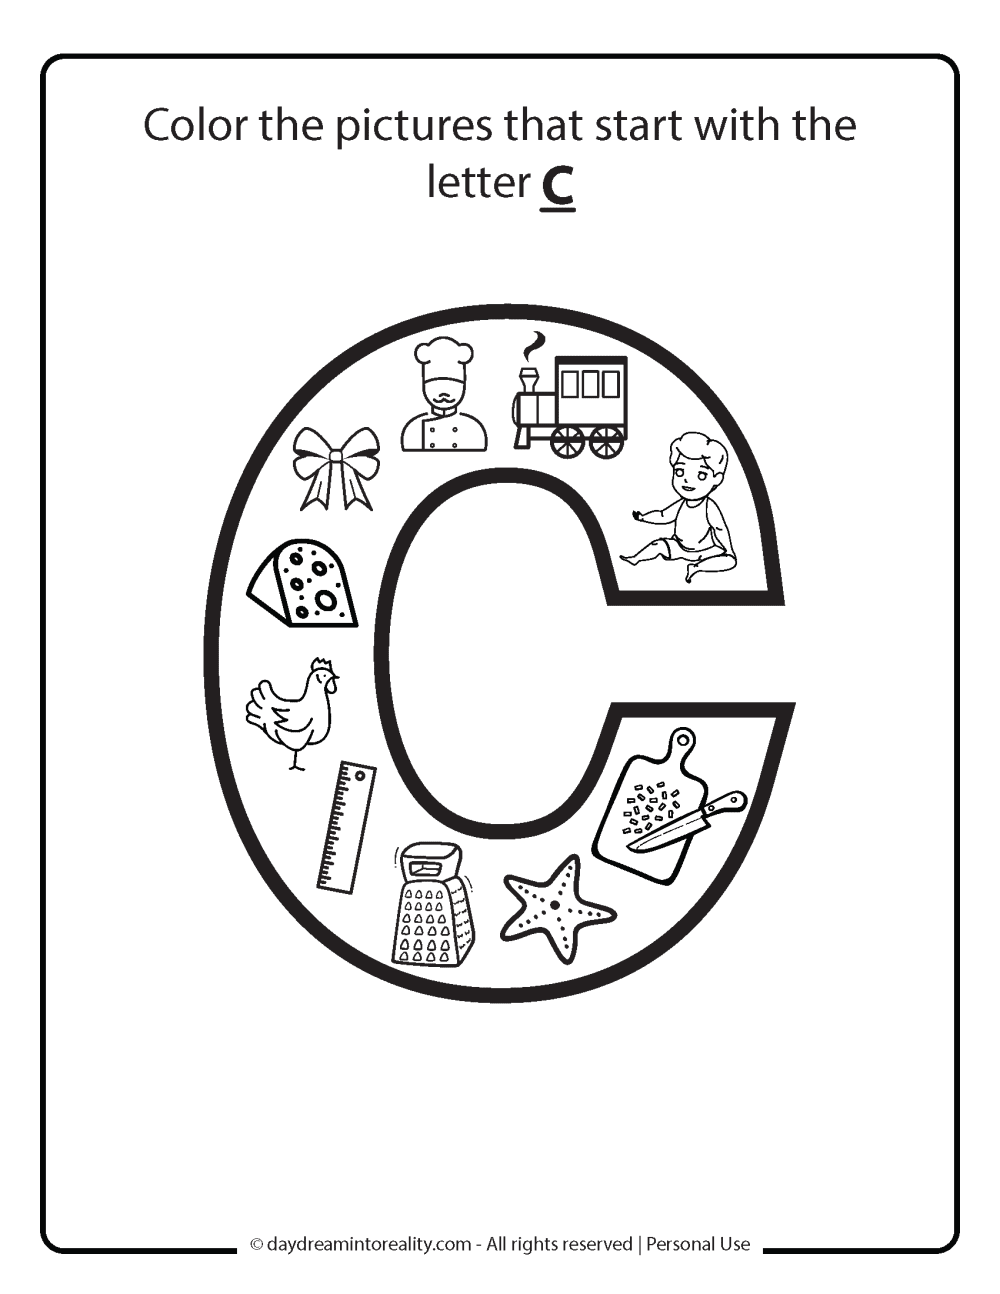 Color pictures that start with the Letter C worksheet free printable